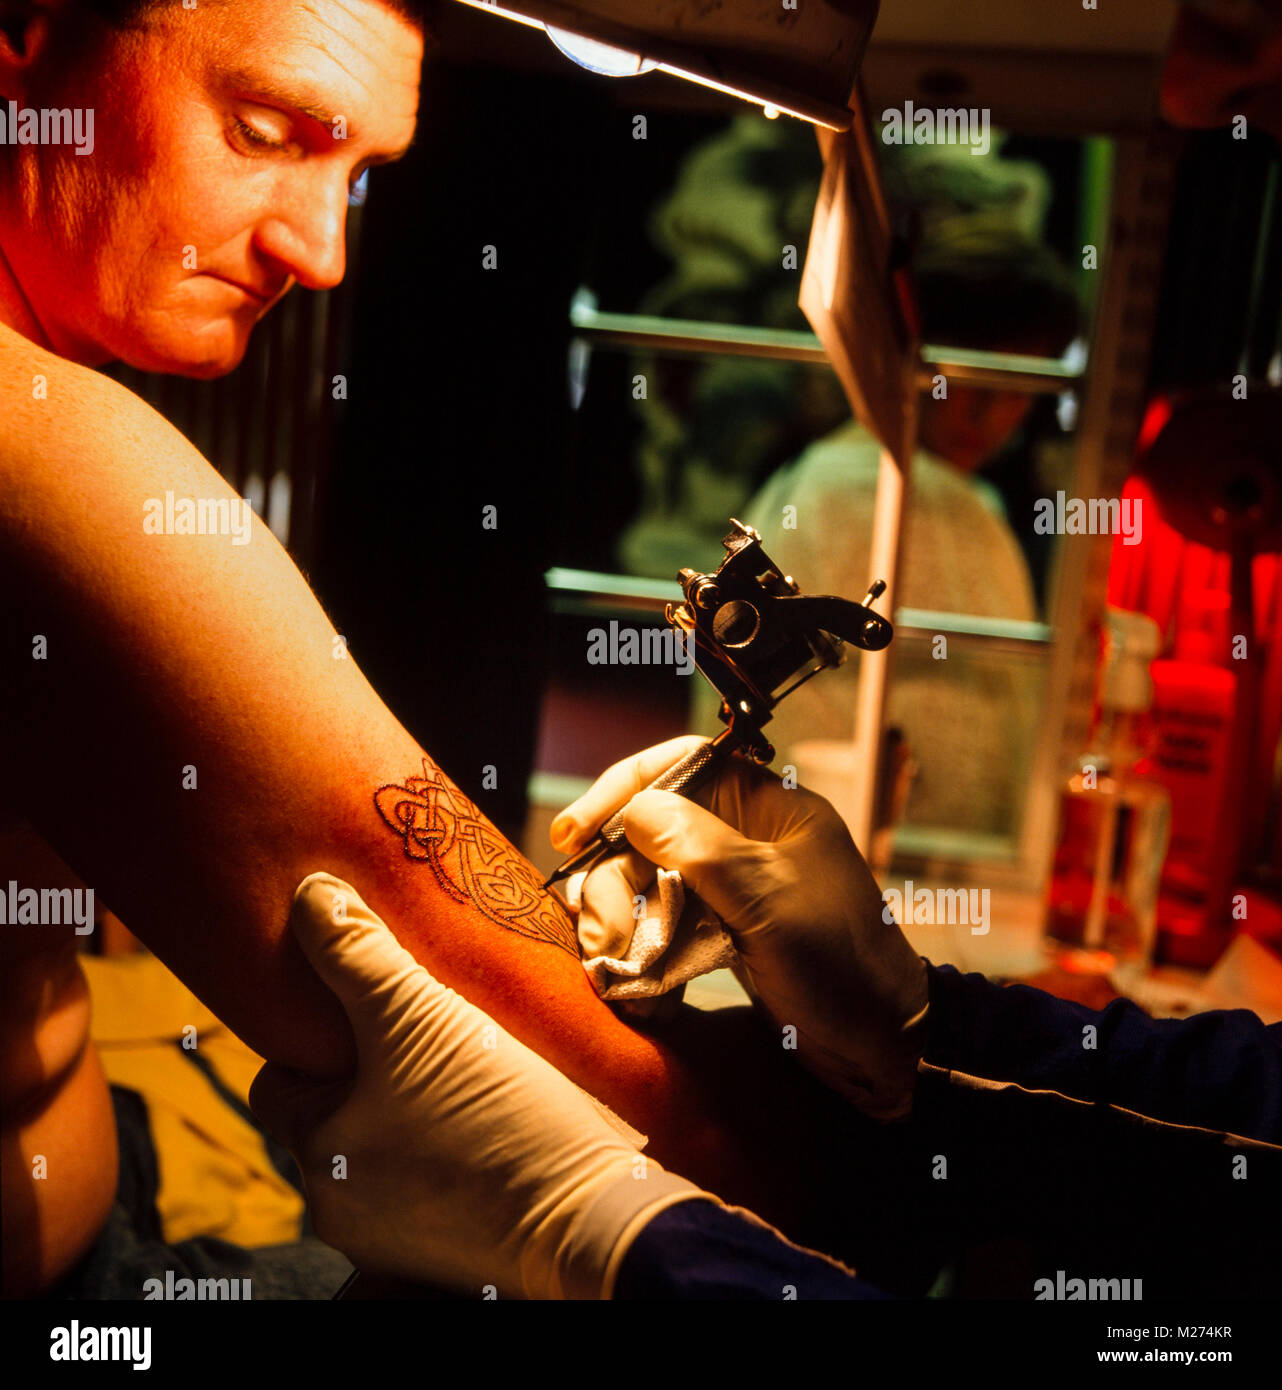 Tattoo artist Marc Saint tattooing a celtic design on a clients arm, London, tattoo parlor, archive photograph 1990 Stock Photo